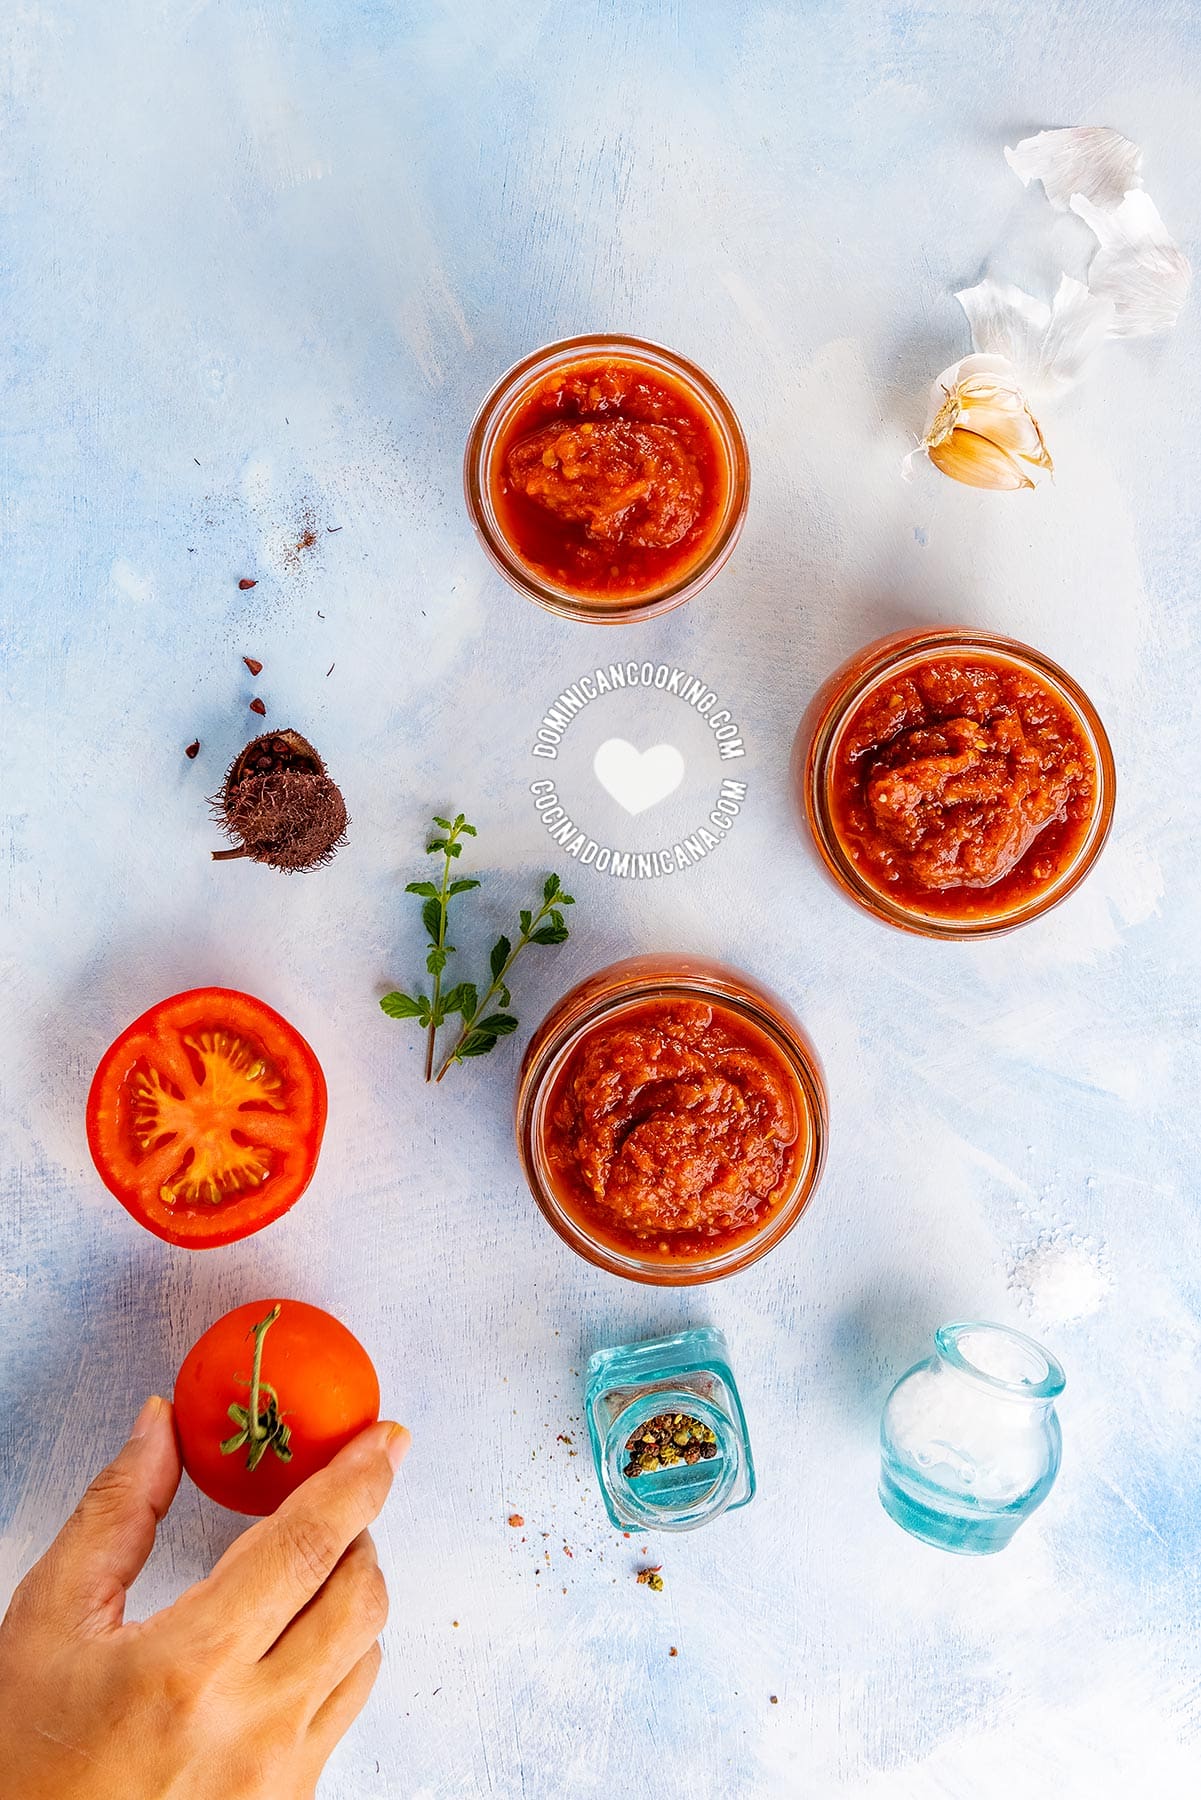 Tomato sauce jars and ingredients